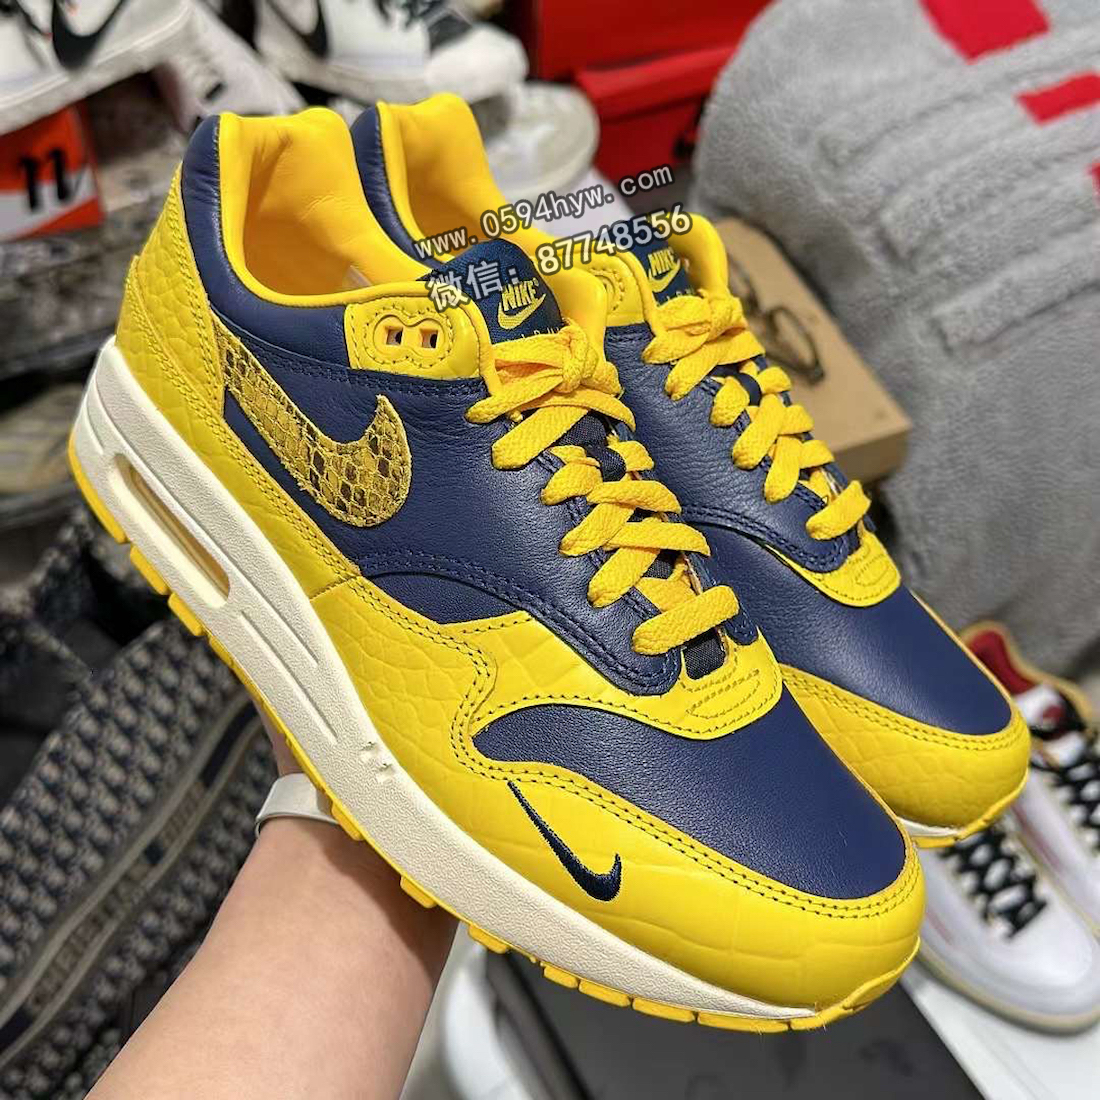 Nike-Air-Max-1-Midnight-Navy-Varsity-Maize-FJ5479-410-Release-Date-1